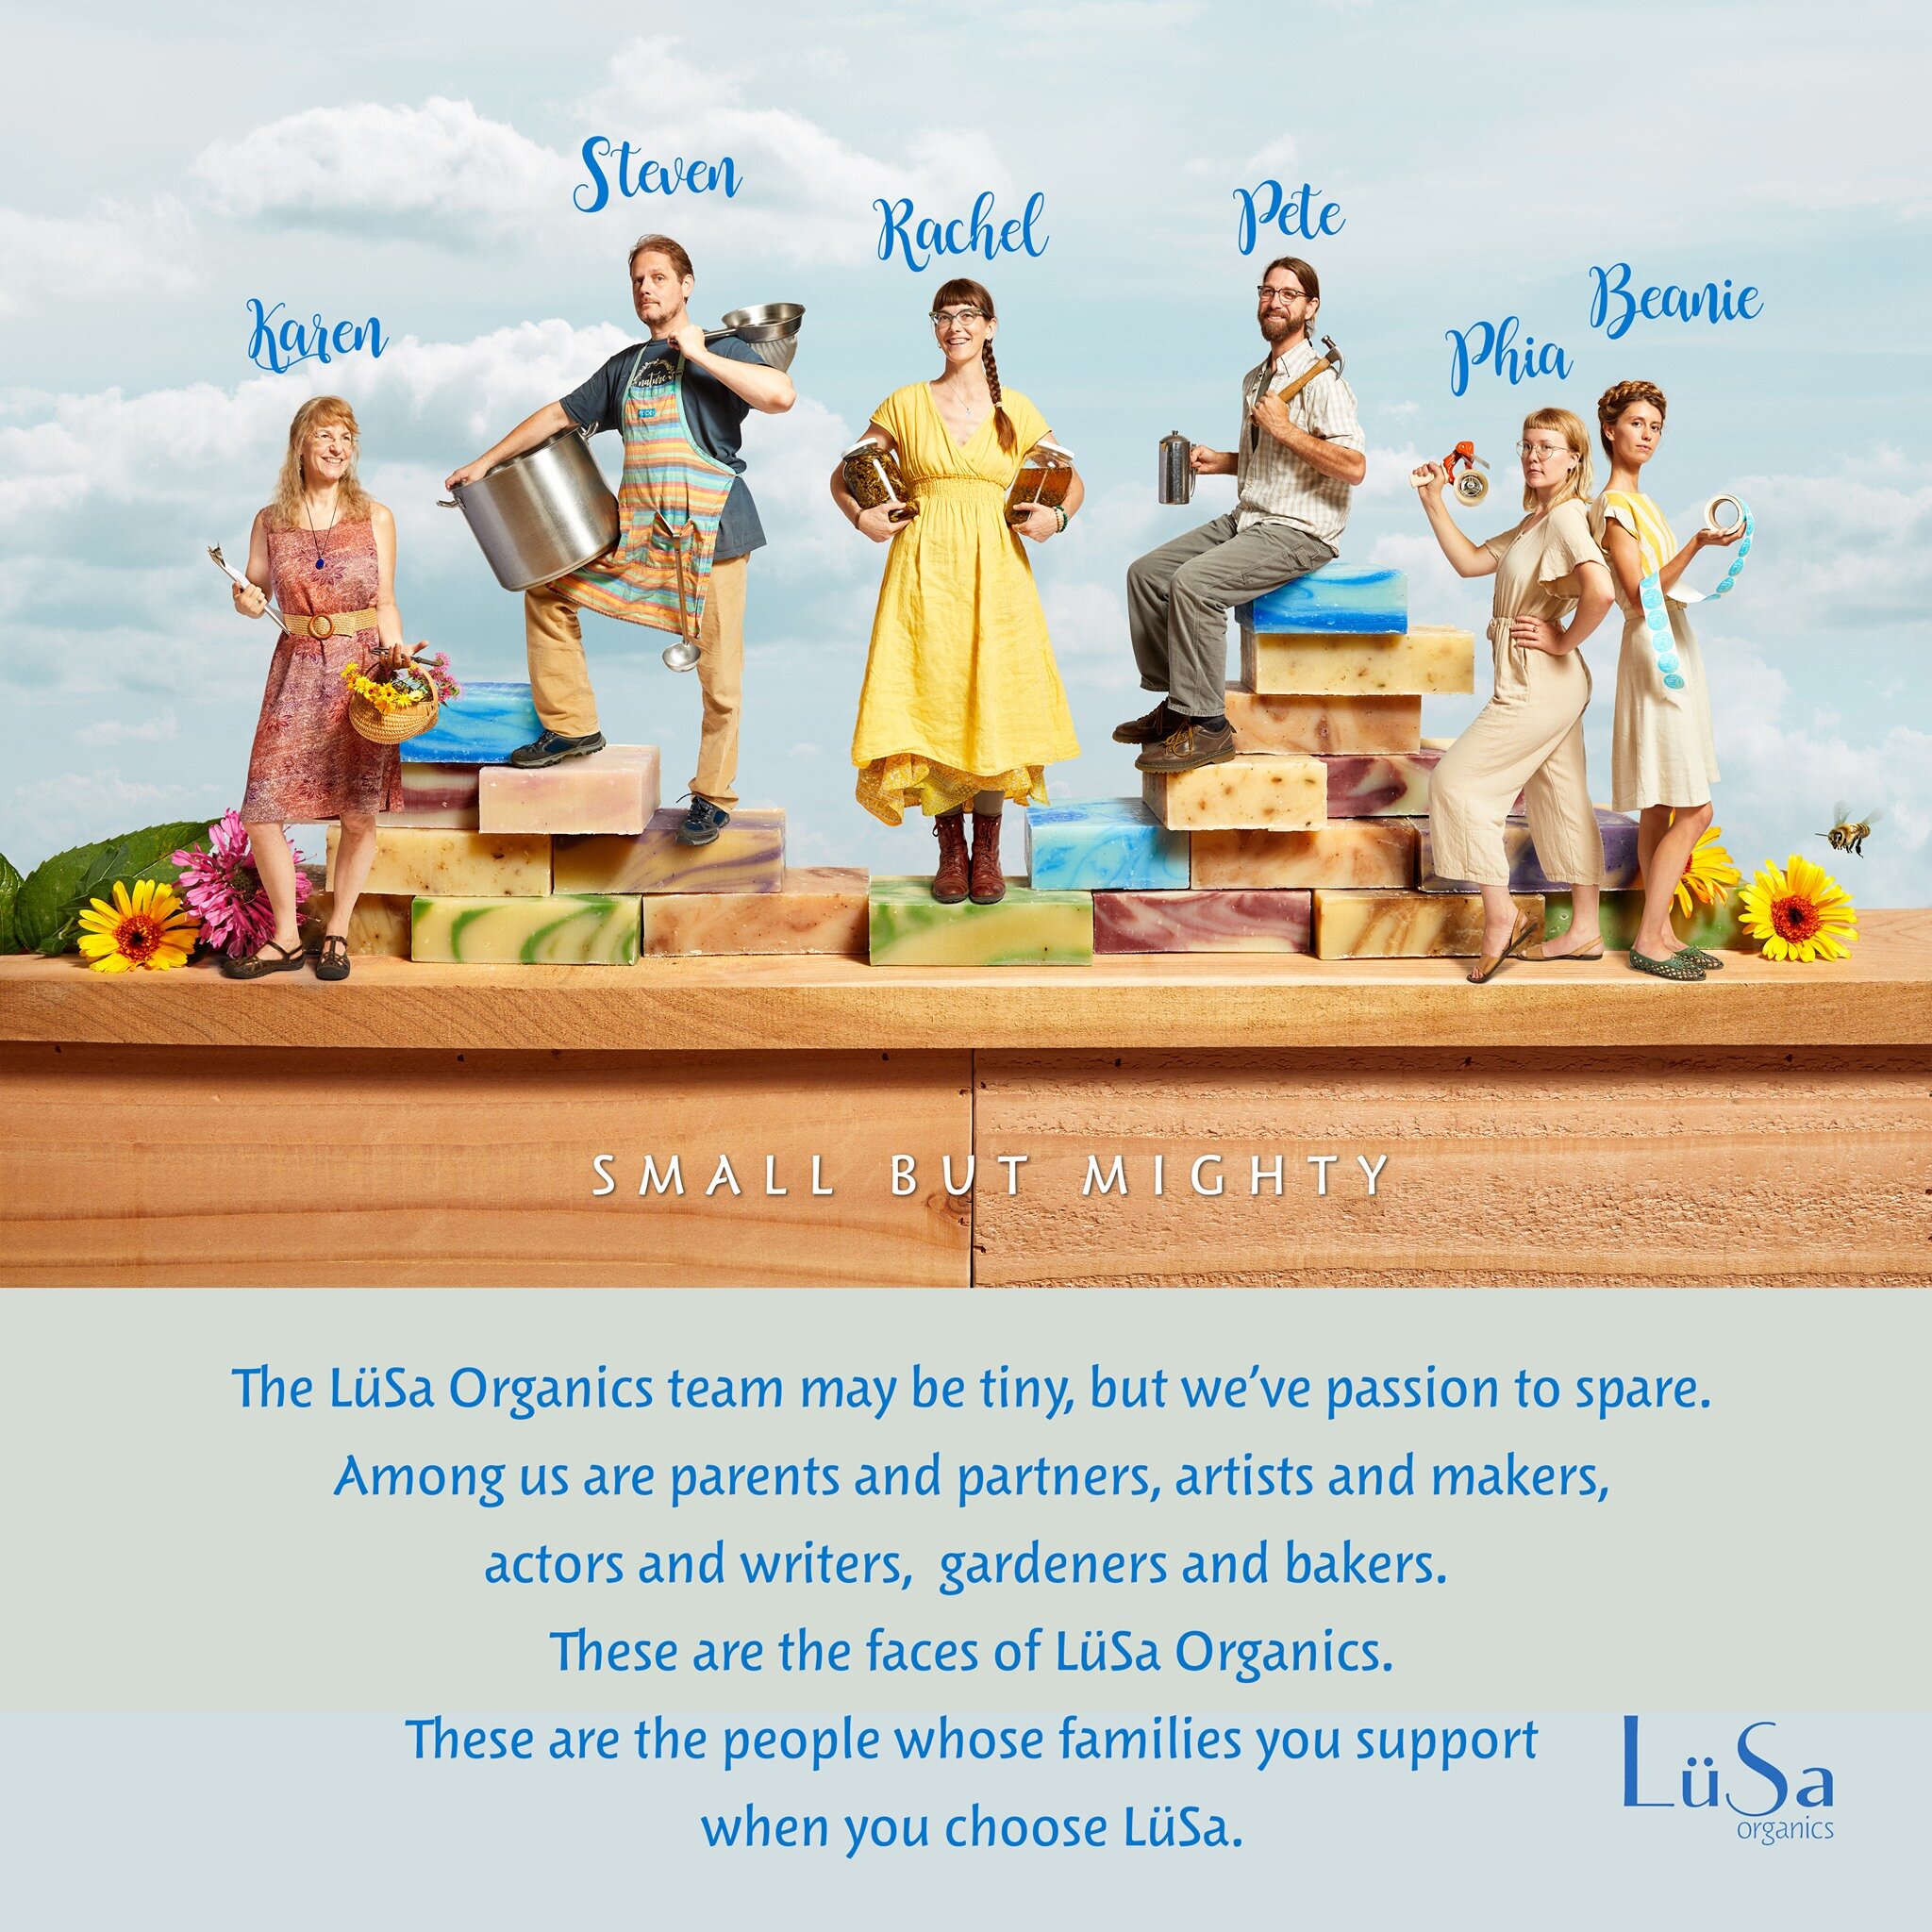 conceptual team portrait advertising home and body care company LuSa Organics: team is composited to look miniature standing on giant blocks of soap.